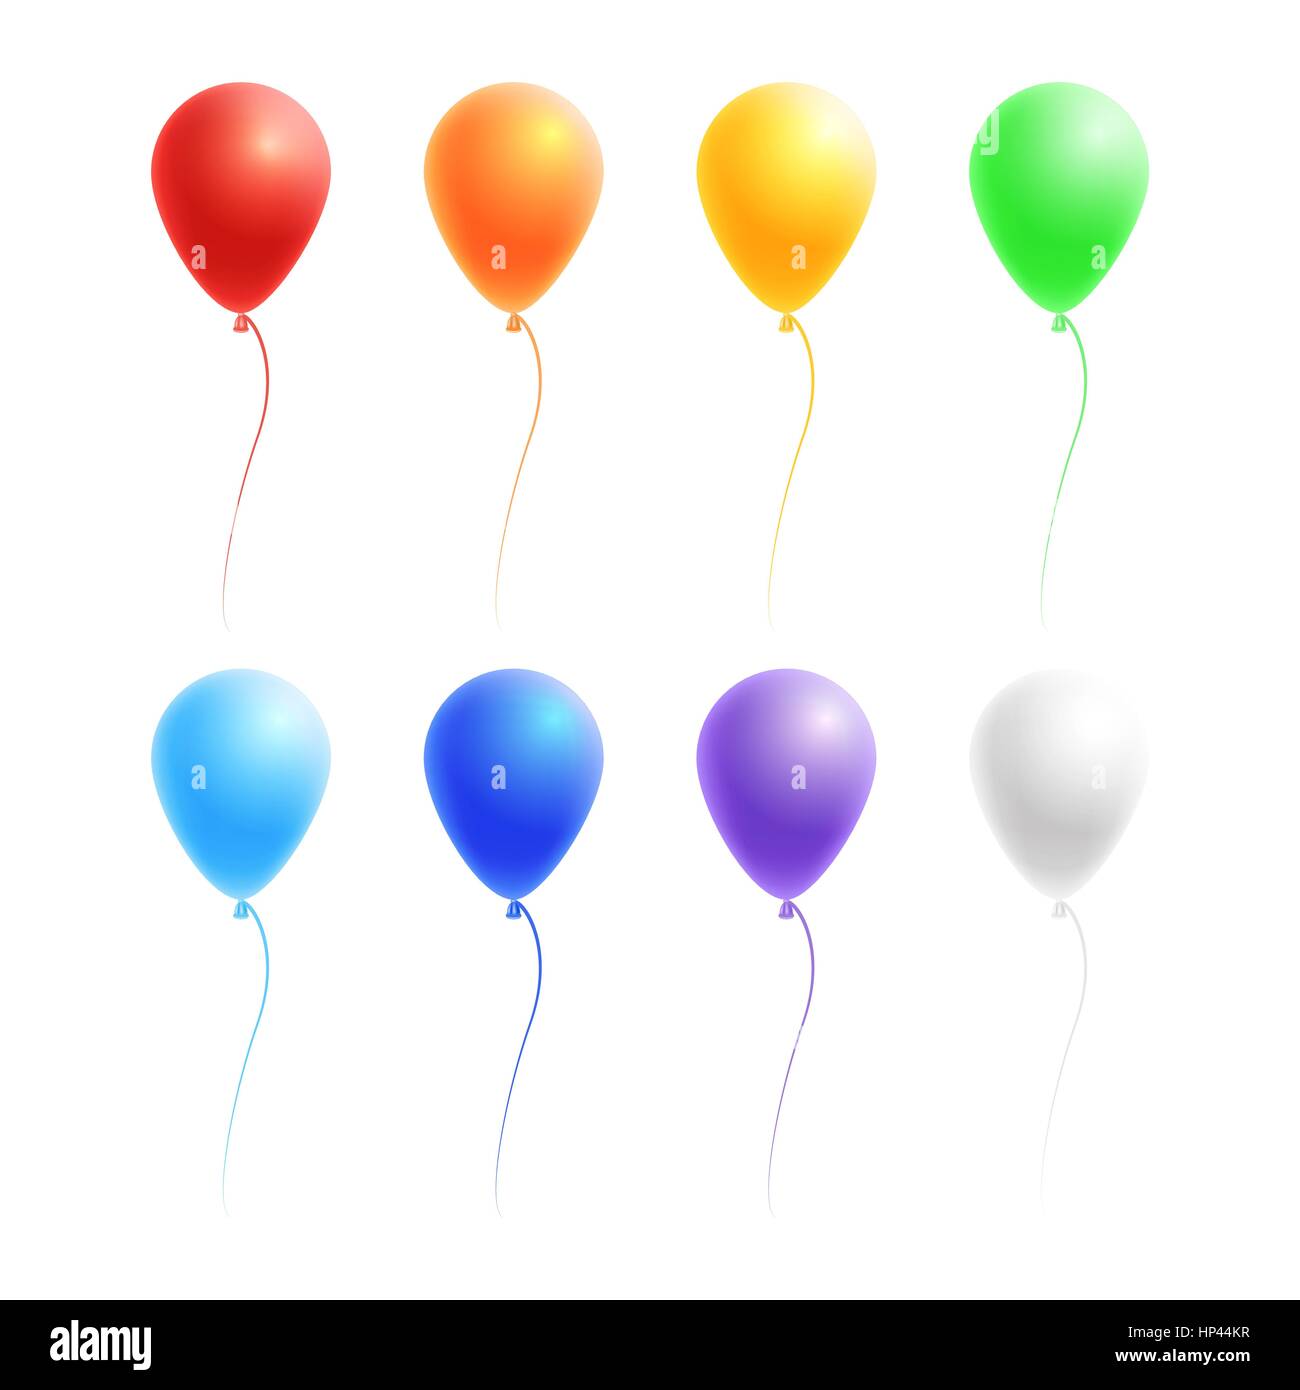 Vector set of colorful birthday or party balloons on red, orange, yellow, green, blue, violet and white color  isolated on white background Stock Vector